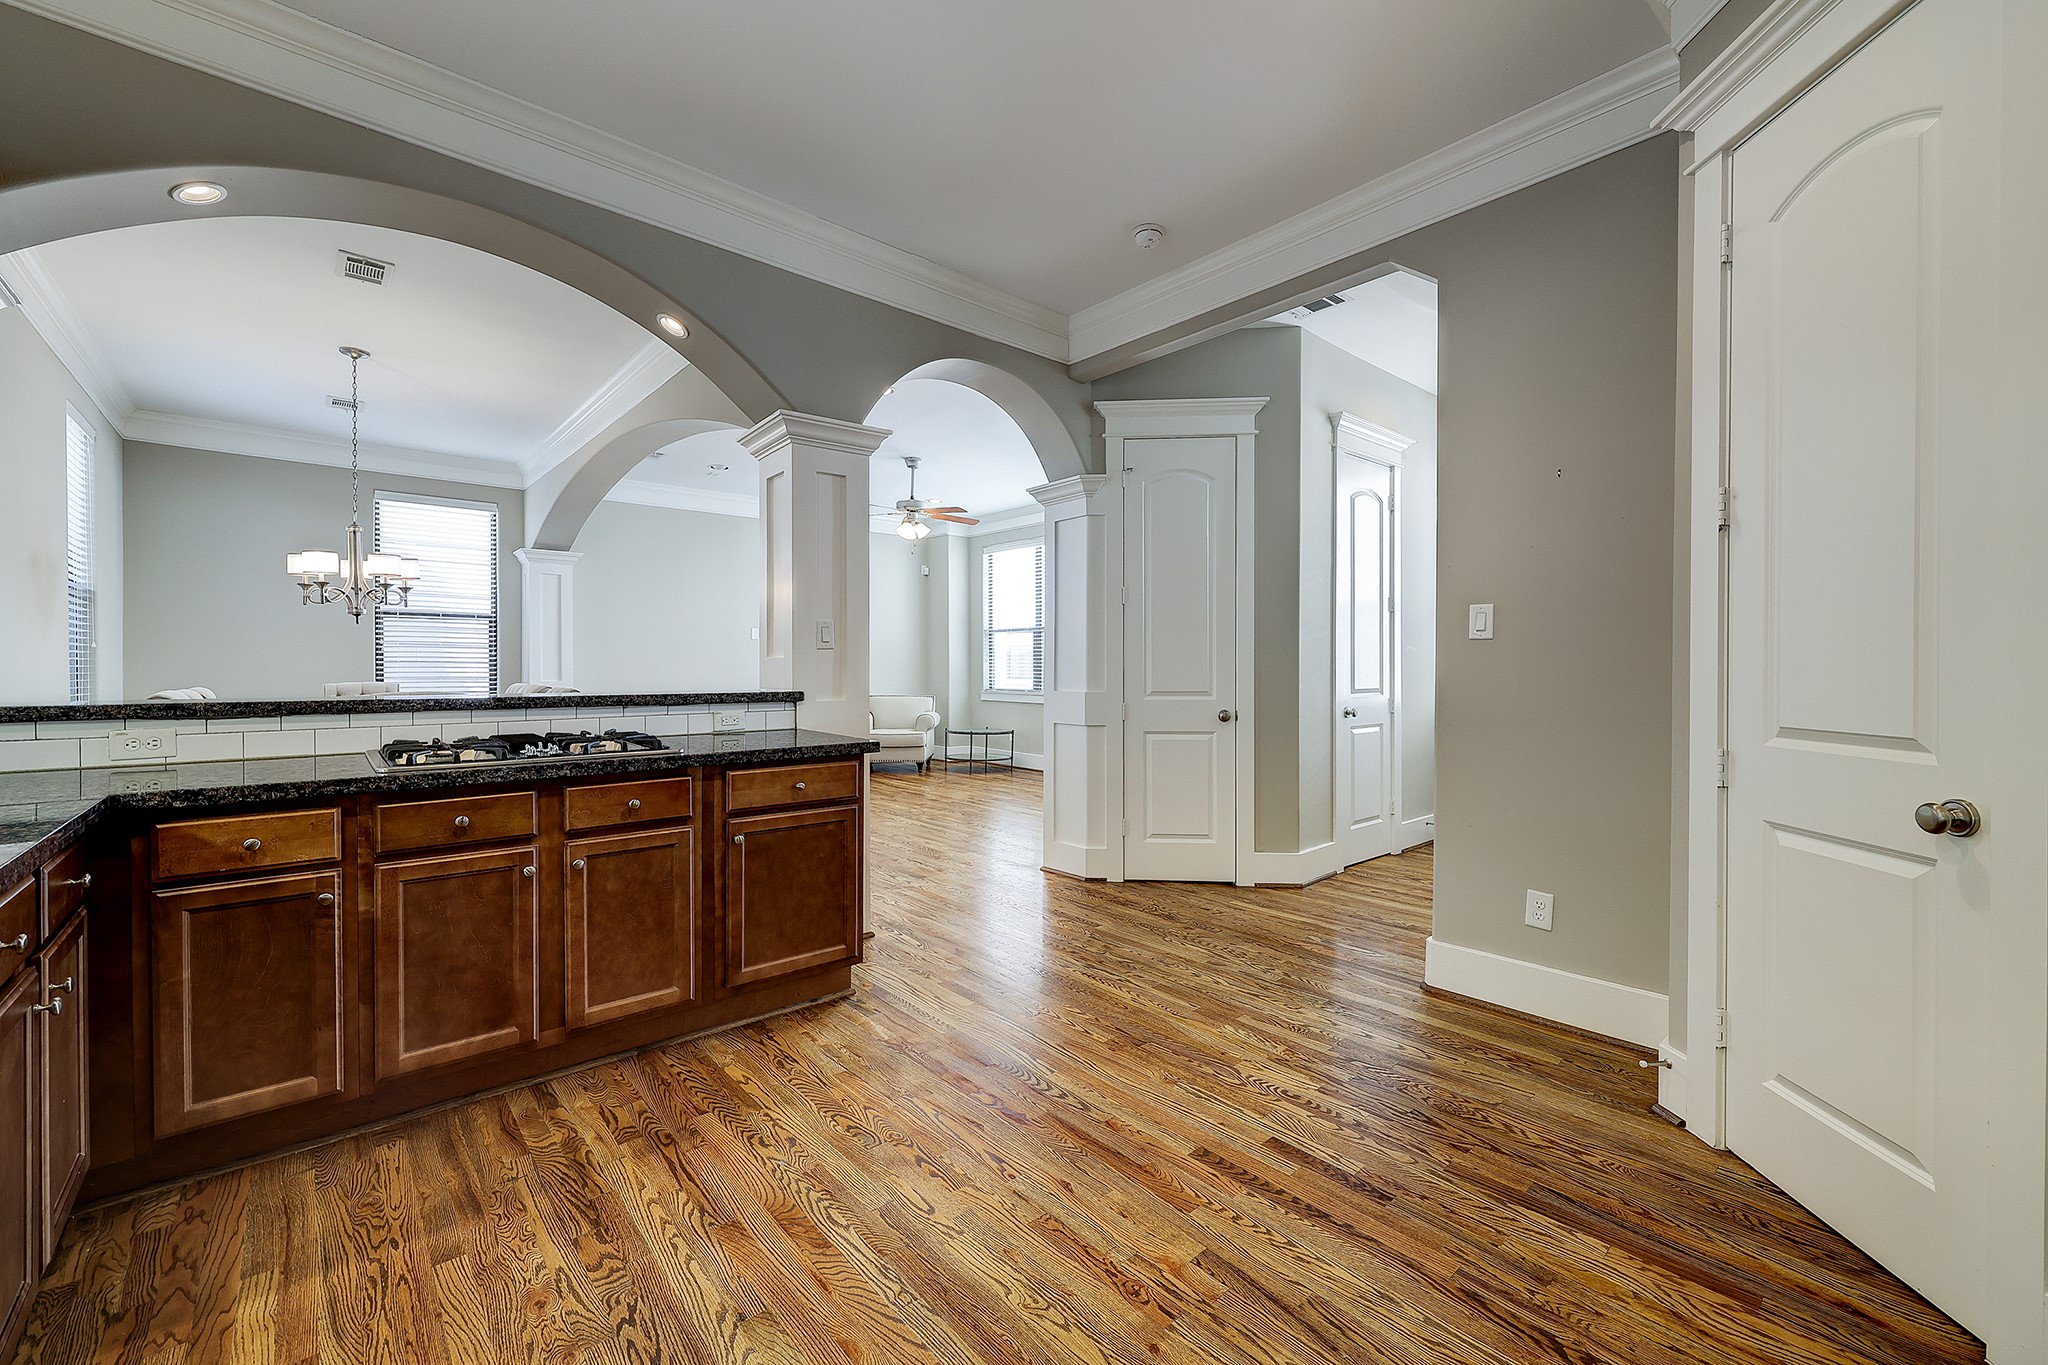 Follow the arches to the living area with plenty of natural lighting, crown molding, ceiling fan and more hardwood flooring.